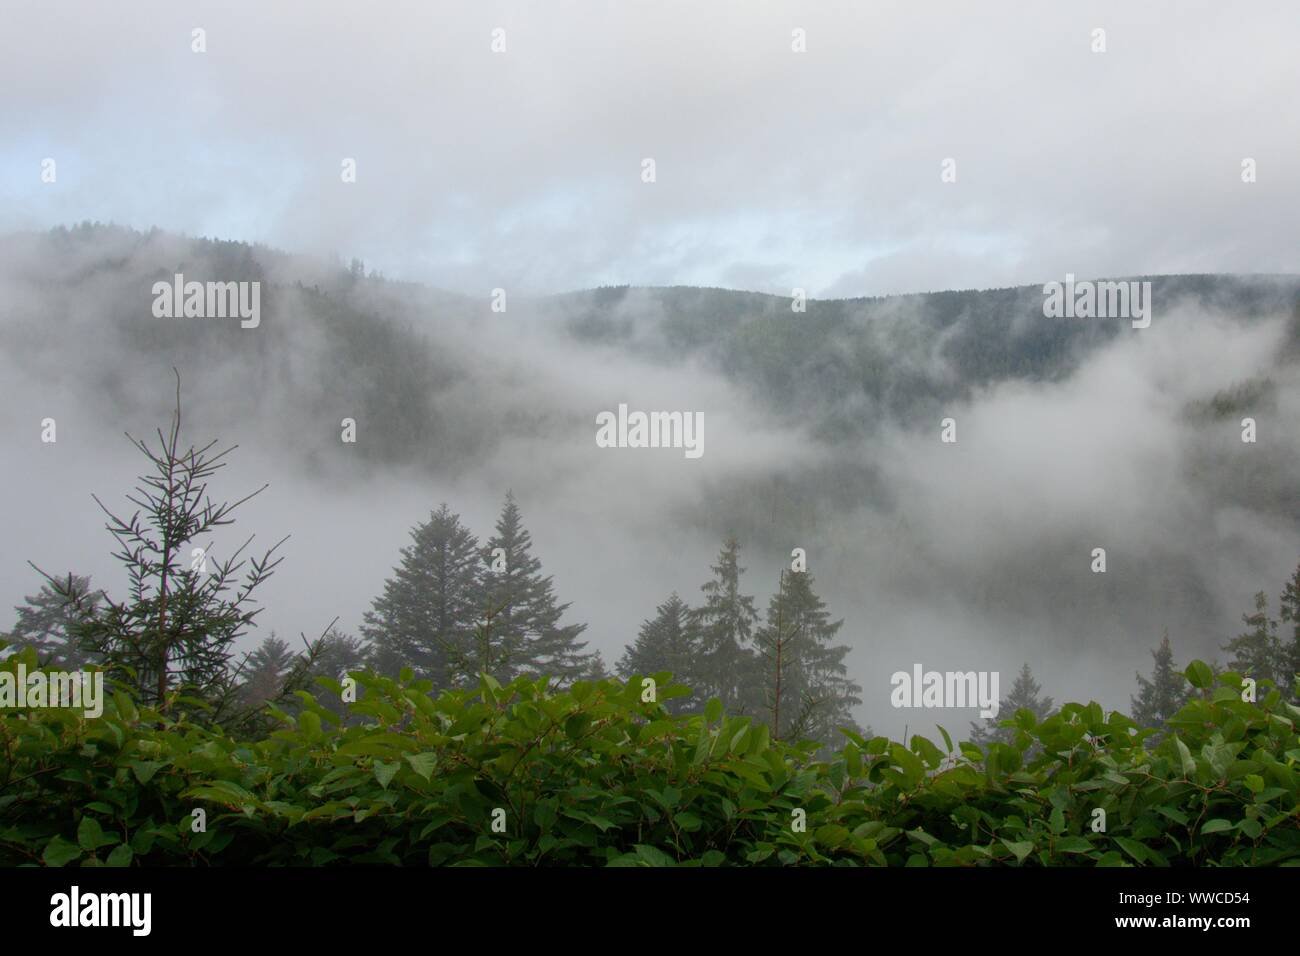 The Black Forest ist one of the most beautiful natures in germany Stock Photo